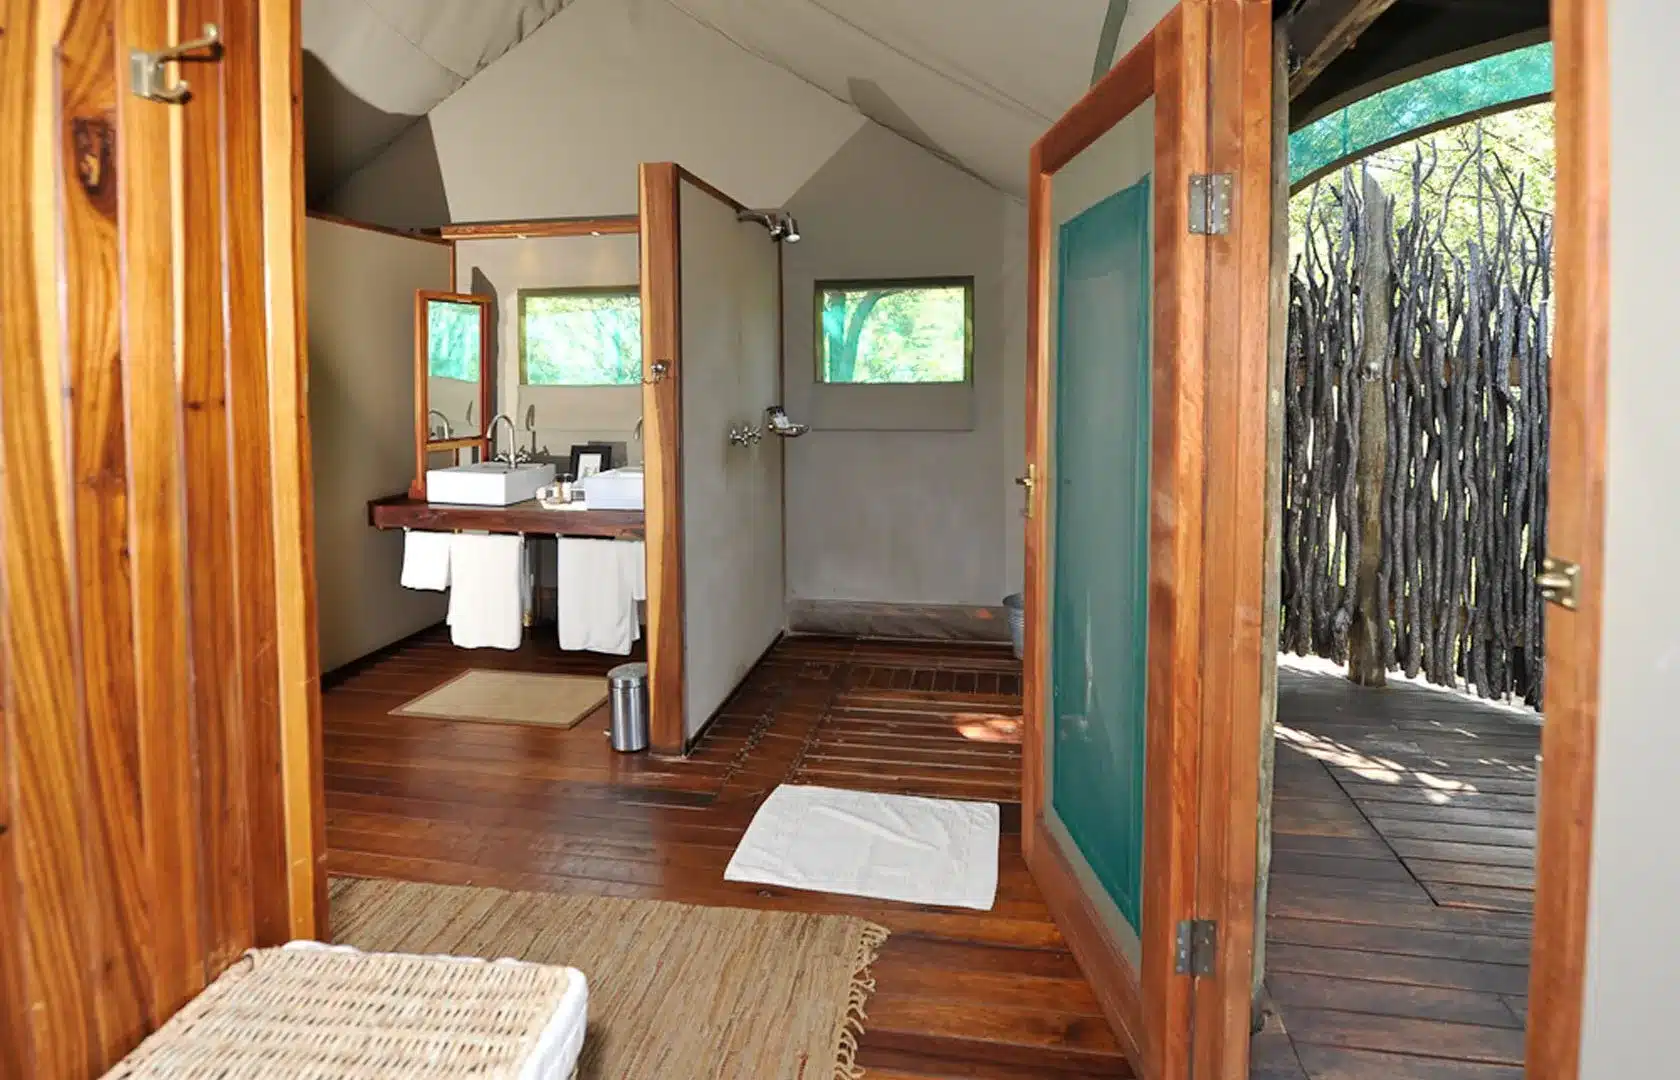 39 Ongava Tented Camp